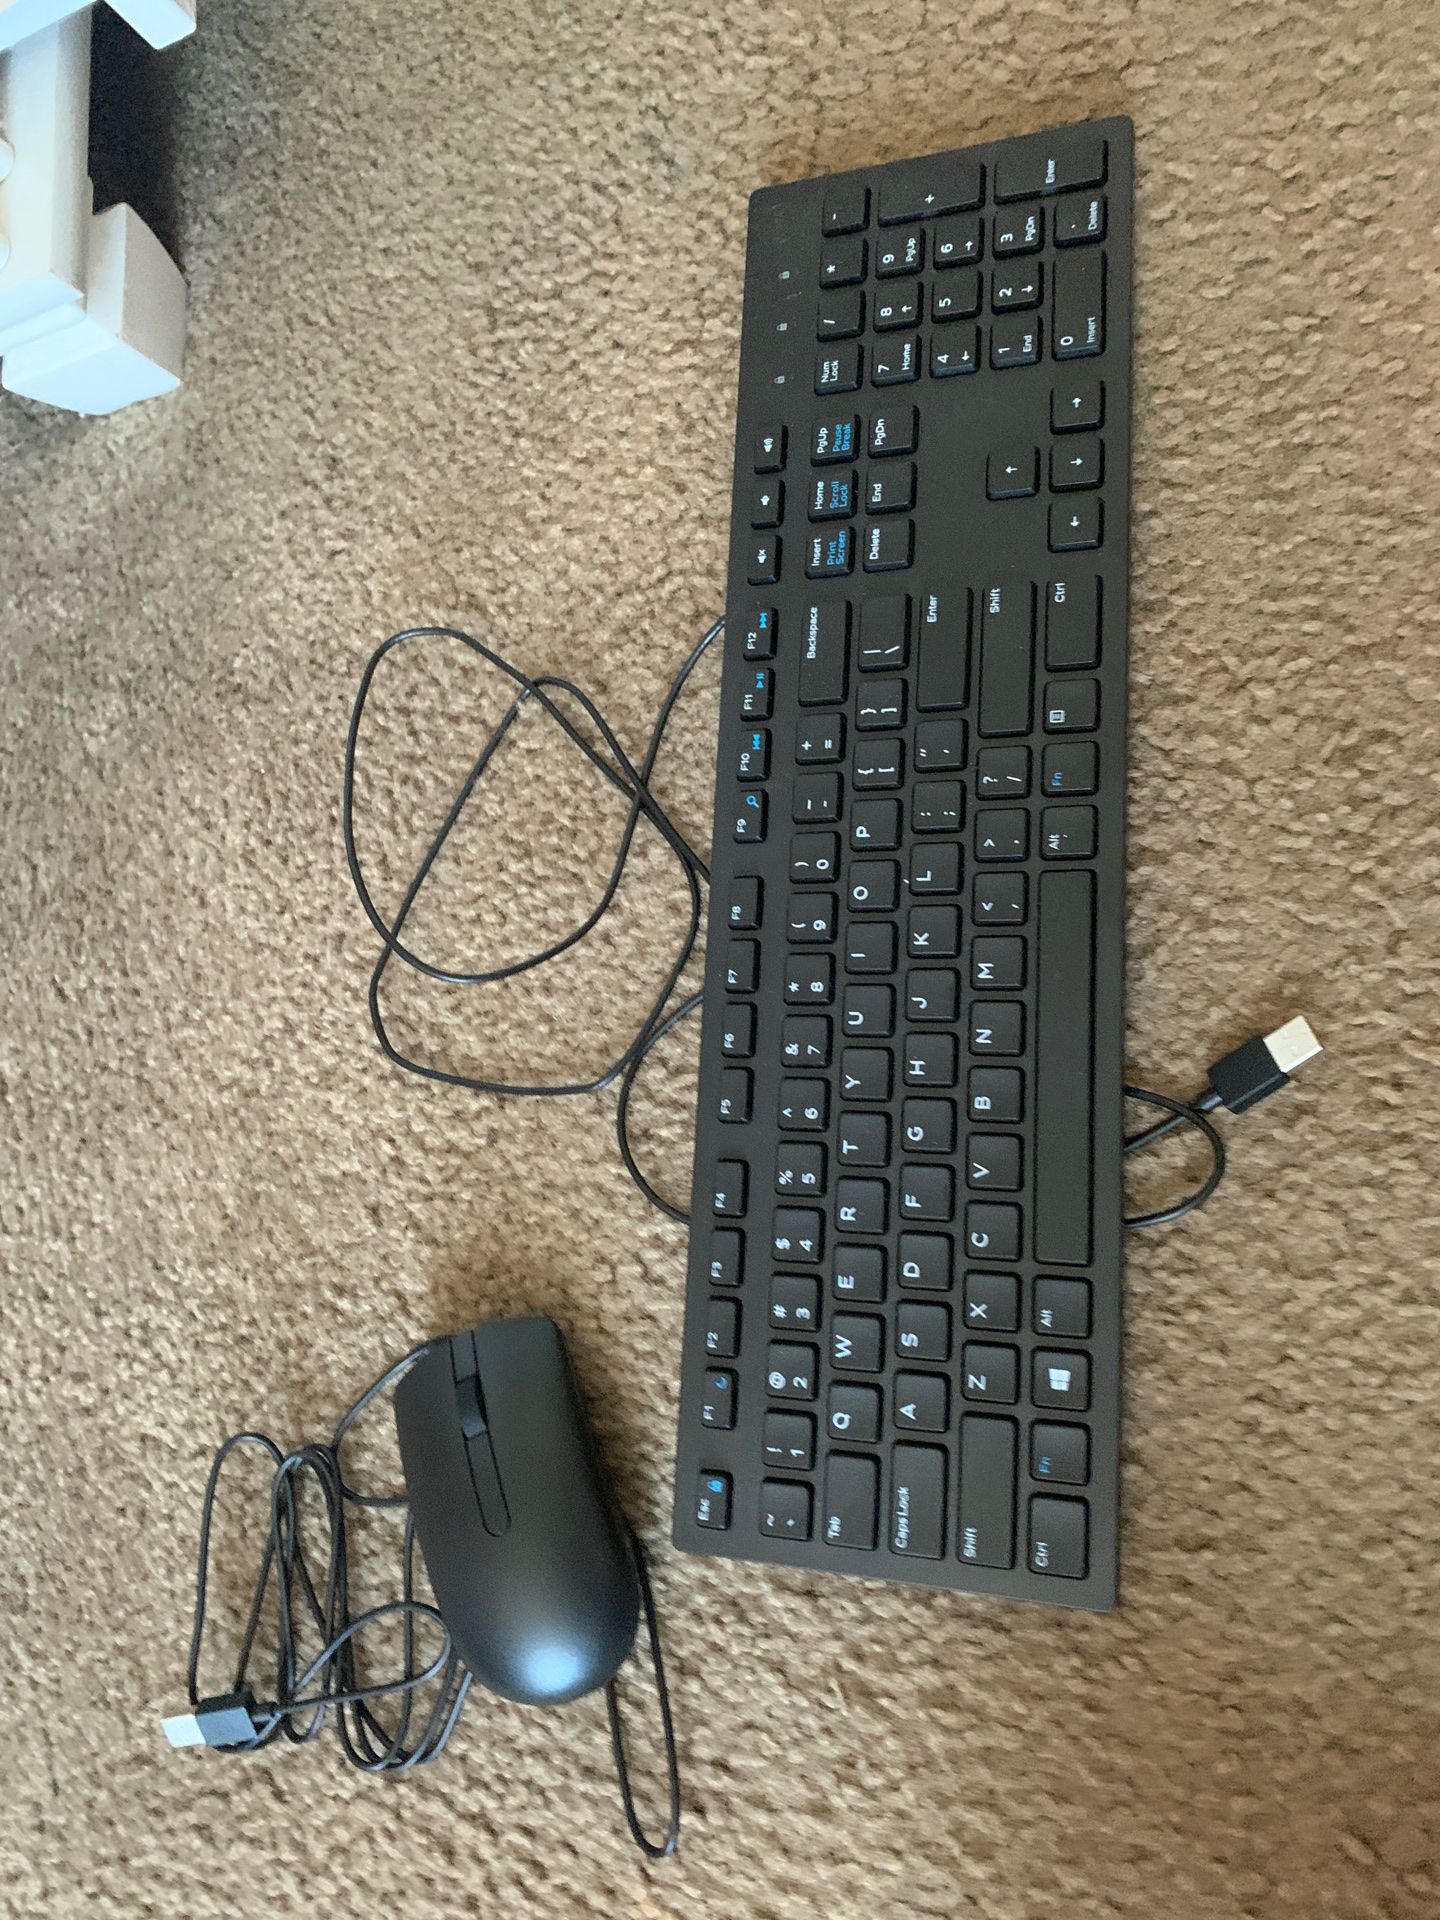 NEW DELL keyboard and mouse